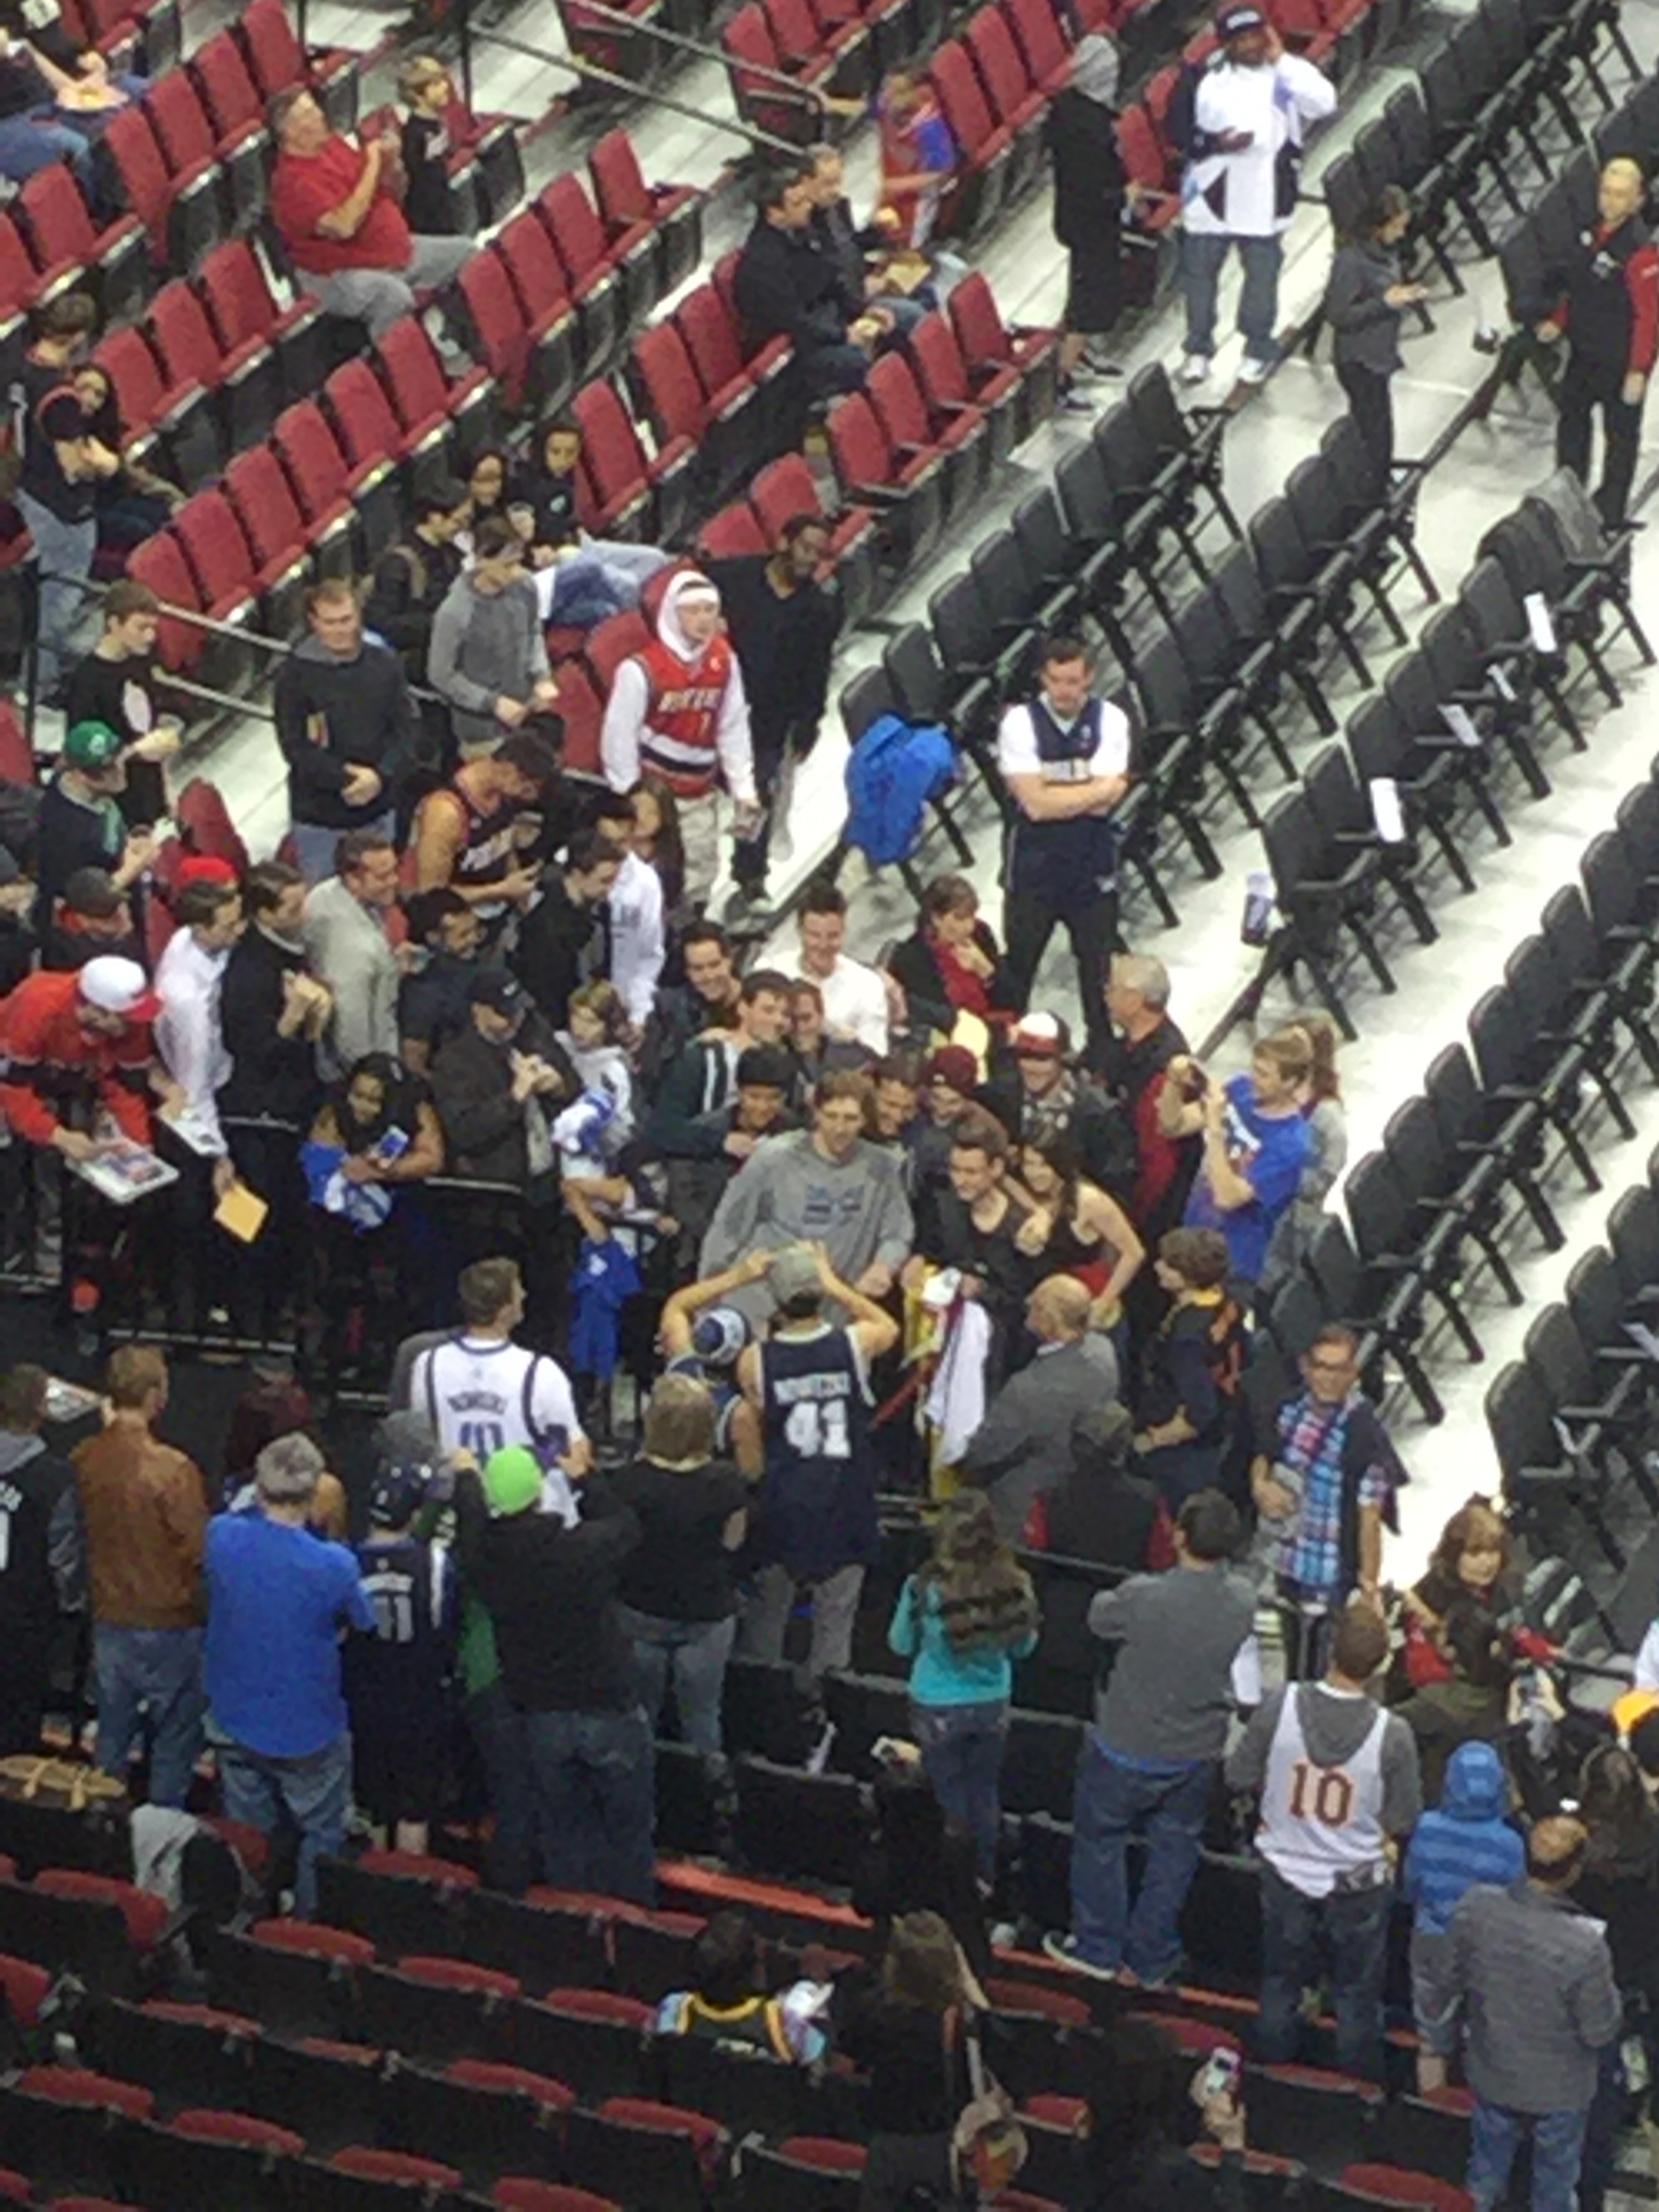 Dirk is the guy wearing gray shirt, he was practicing before the game started! Truly a class act, he took the time to take pictures and sign autographs  to fans, you can really tell he appreciates them and happy to do so!